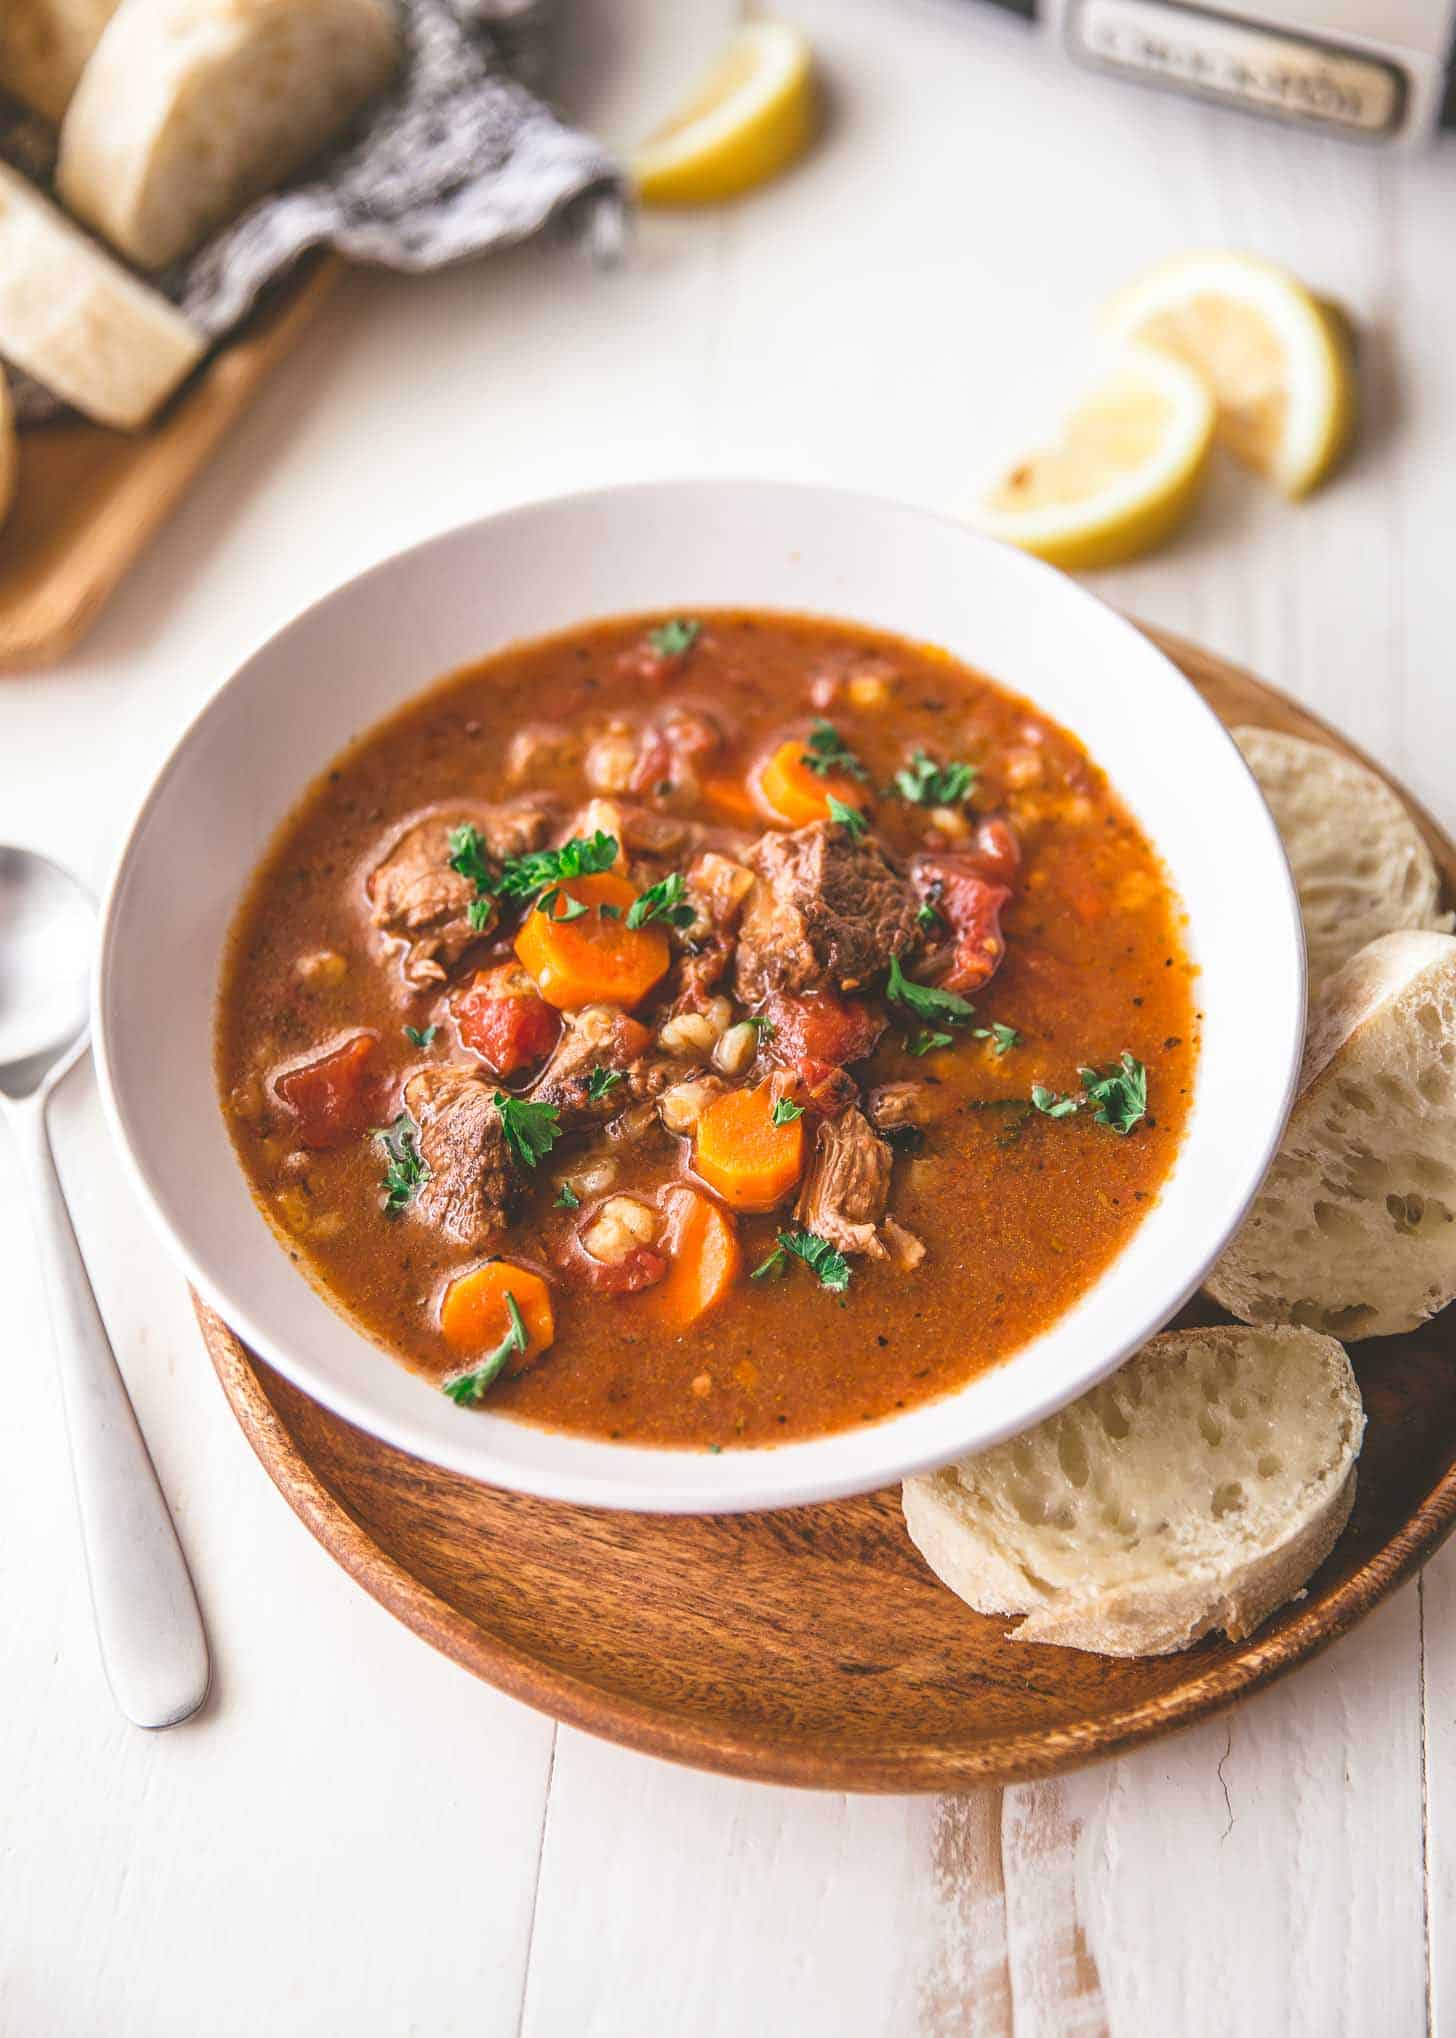 Slow Cooker Beef and Barley Soup from Inquiring Chef on foodiecrush.com